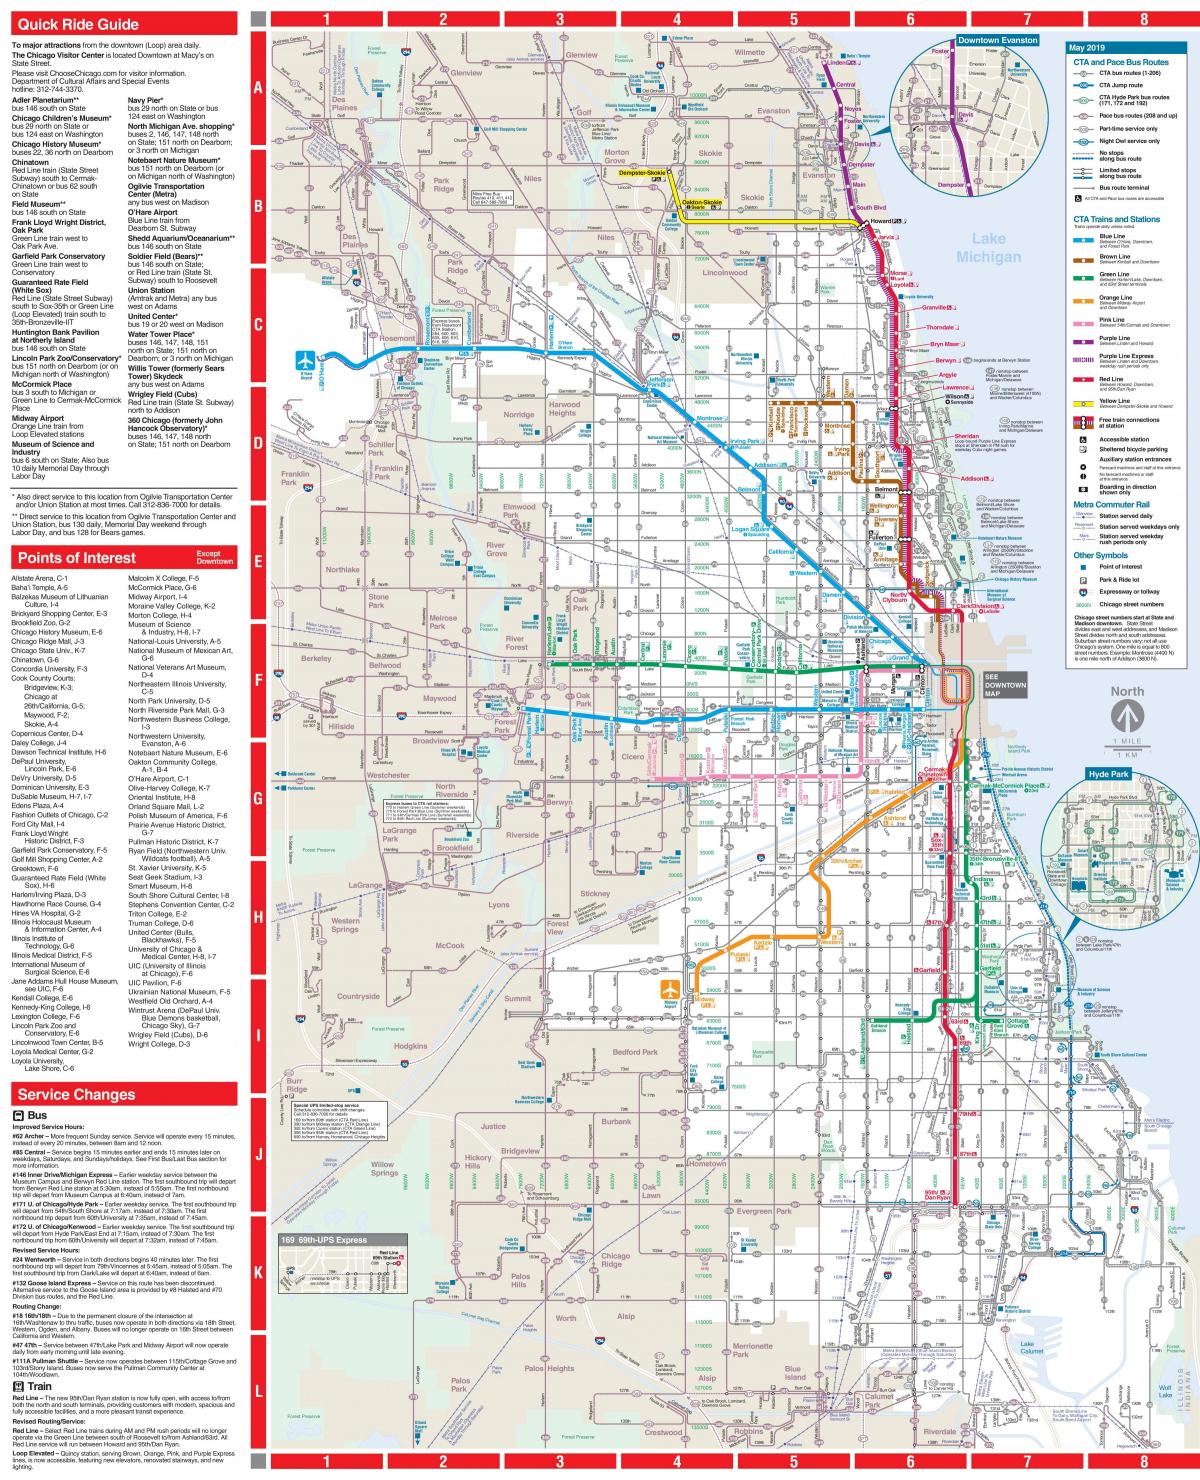 Chicago bus station map